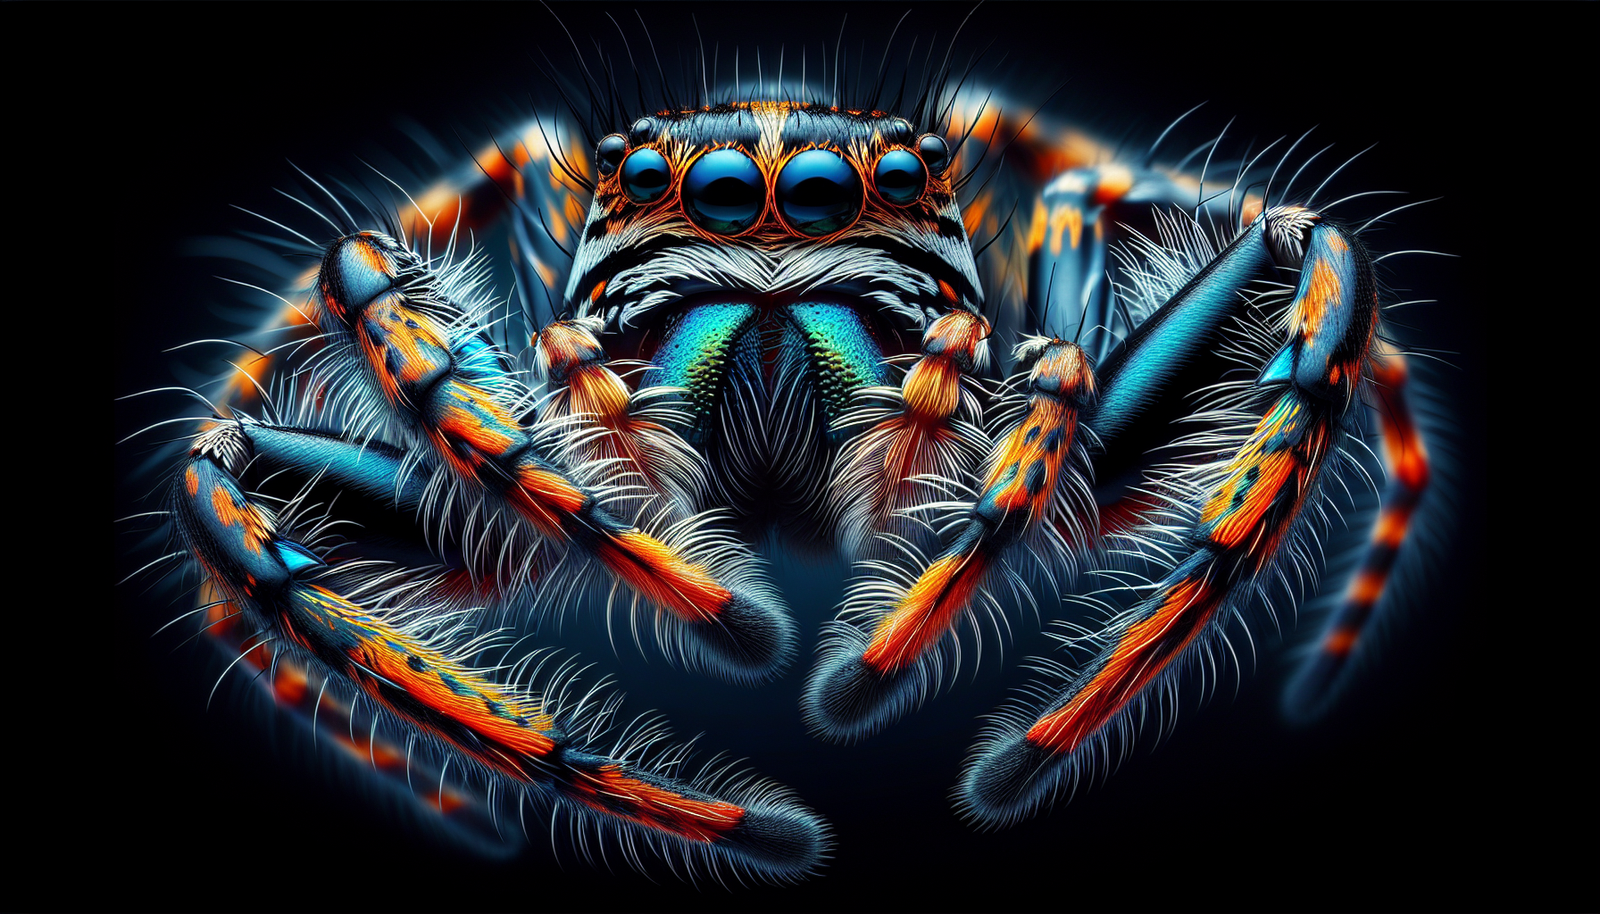 What Are The Characteristics Of The Vibrant And Fast-moving Malaysian Tiger Spider?